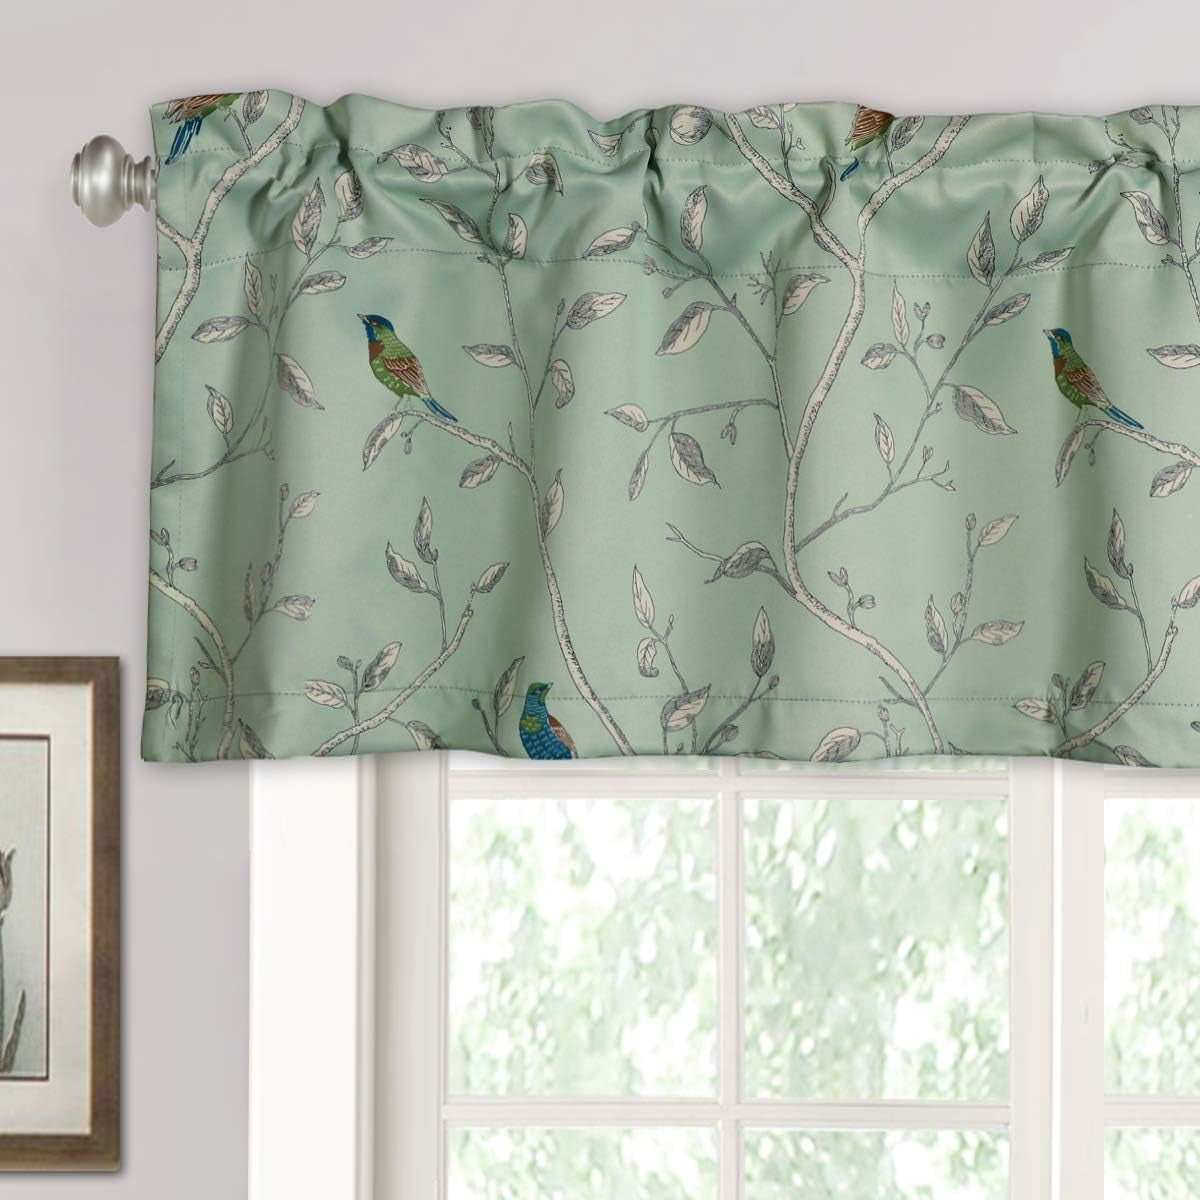 H.VERSAILTEX Blackout Curtain Valances for Kitchen Window/Living Room/Bathroom Privacy Added Rod Pocket Home Decoration Winow Valance, 52" W X 18" L, Floral in Sage and Brown  H.VERSAILTEX Birds In Sage 52"W X 18"L 